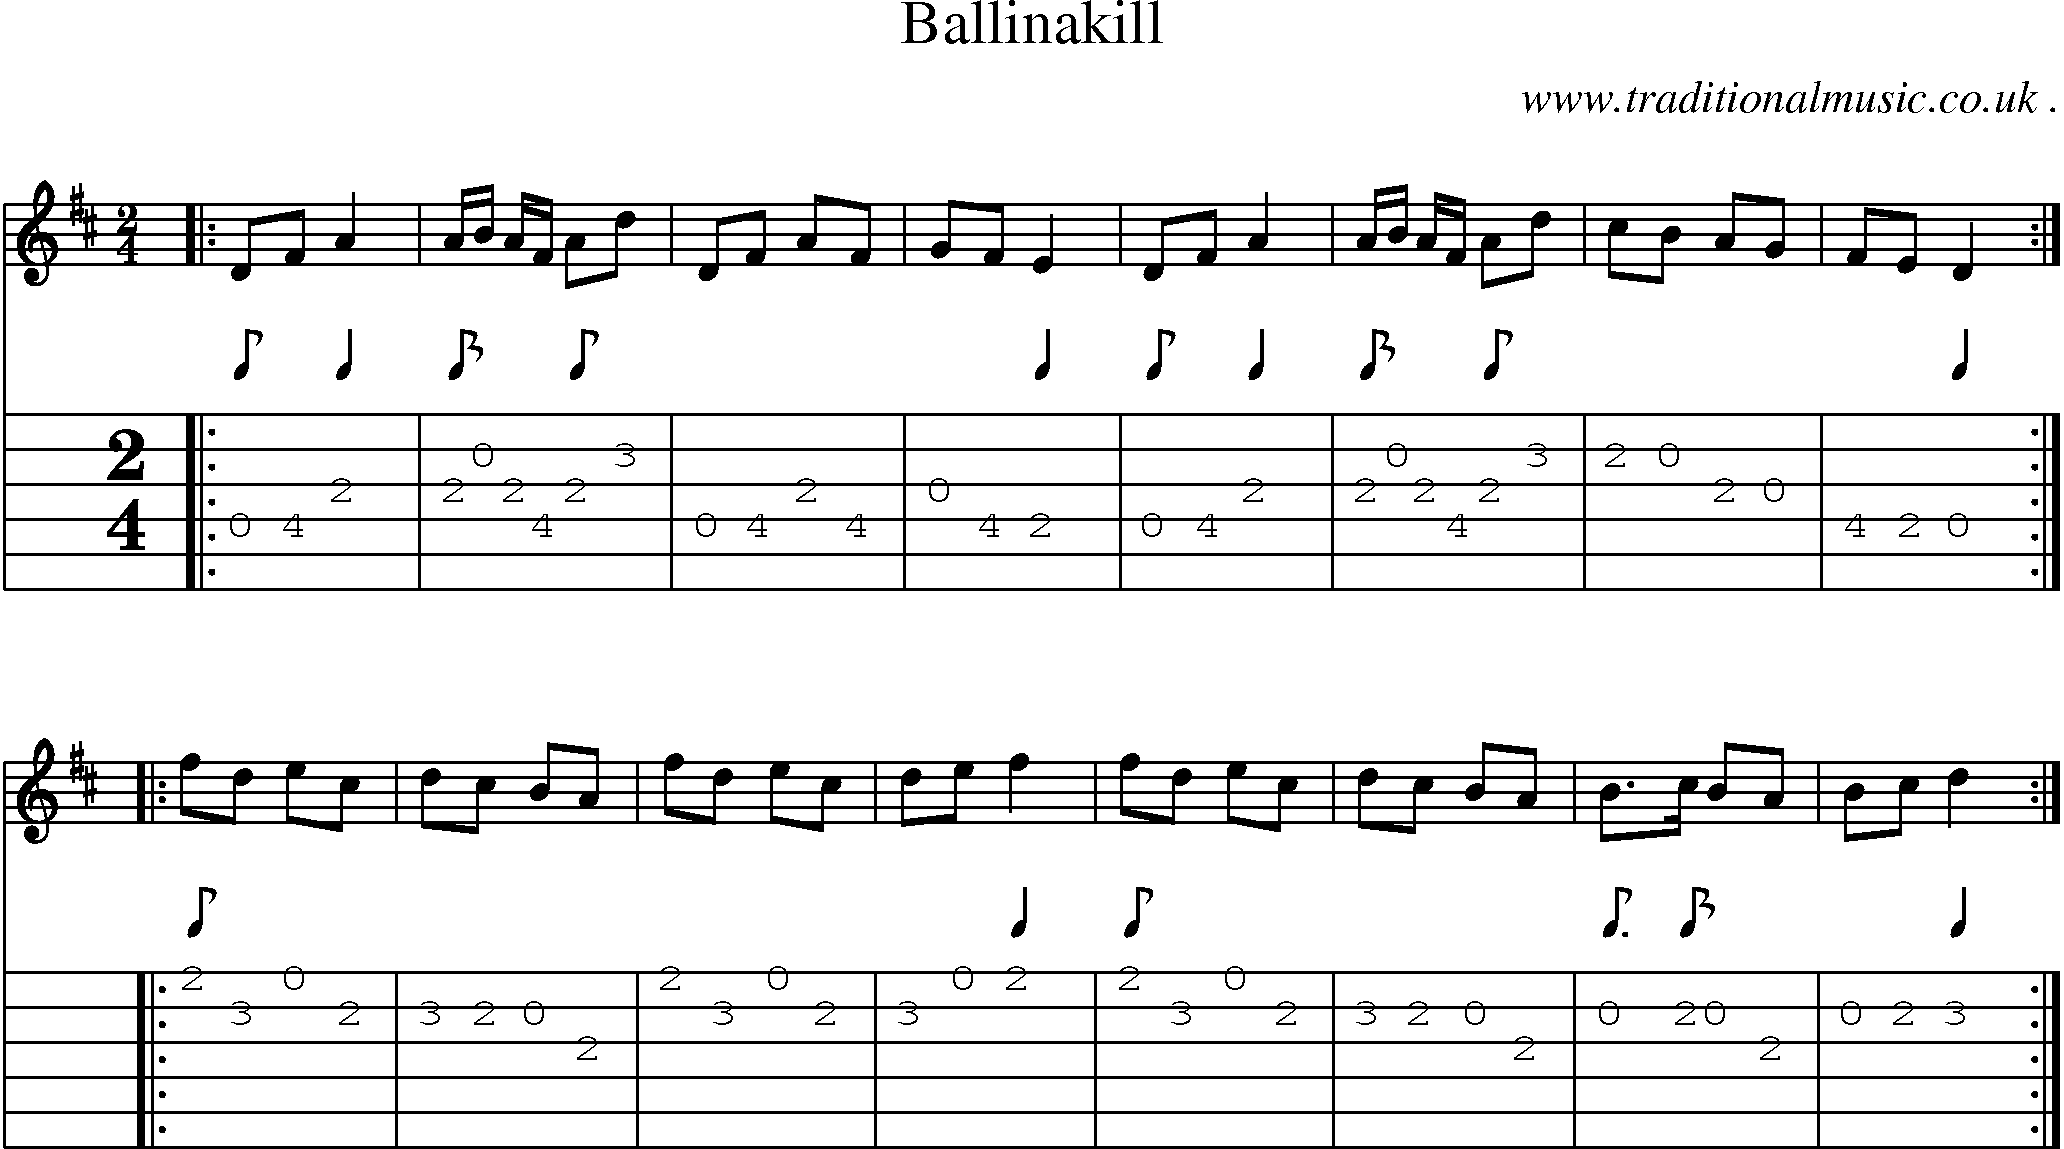 Sheet-Music and Guitar Tabs for Ballinakill